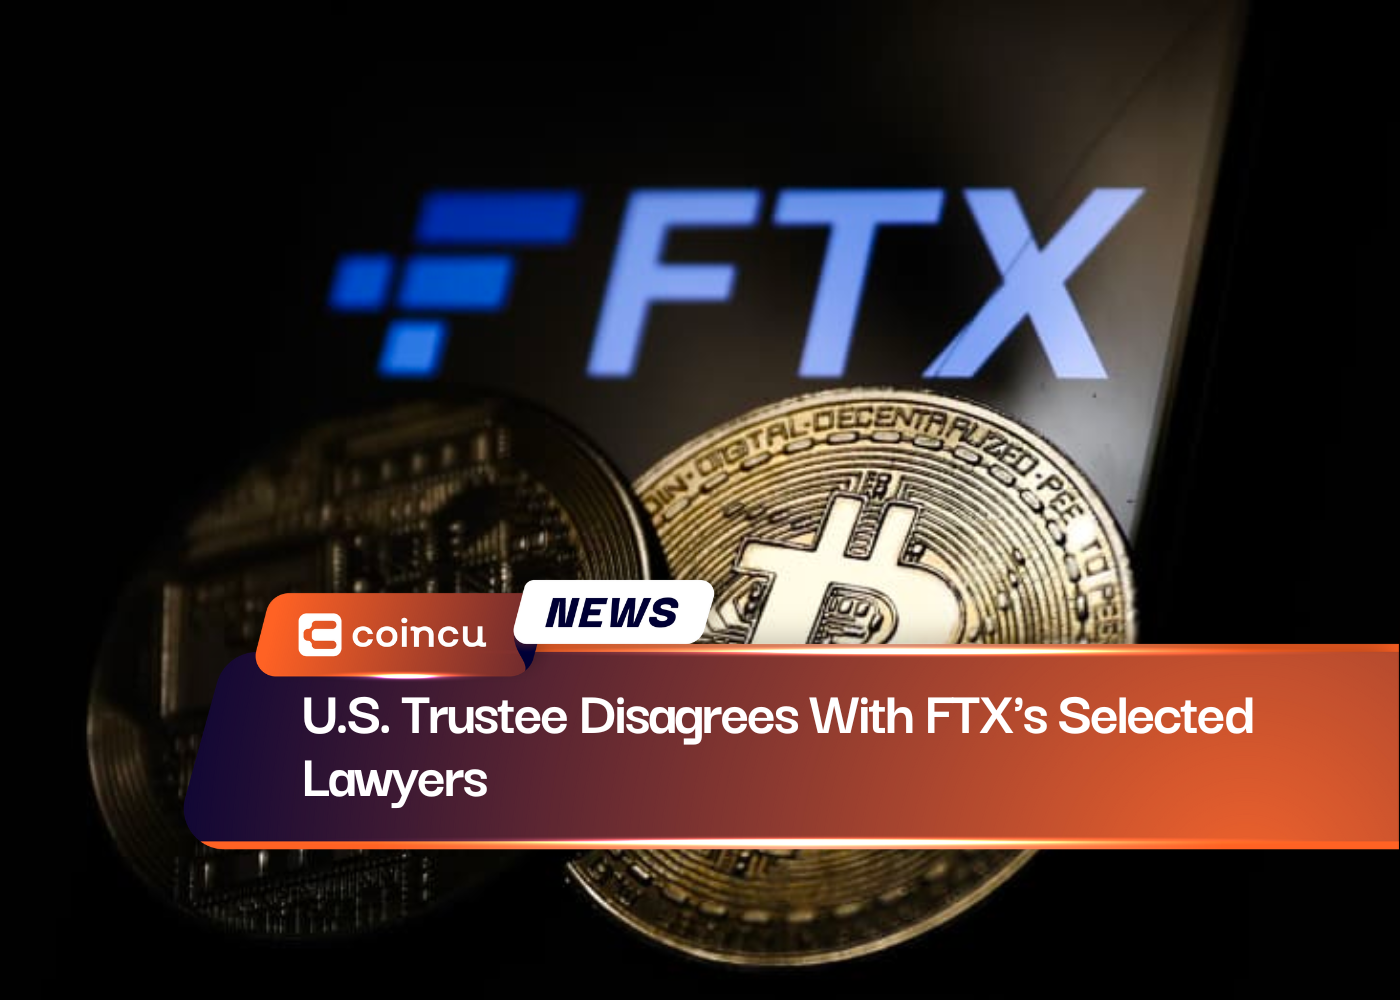 U.S. Trustee Disagrees With FTX's Selected Lawyers